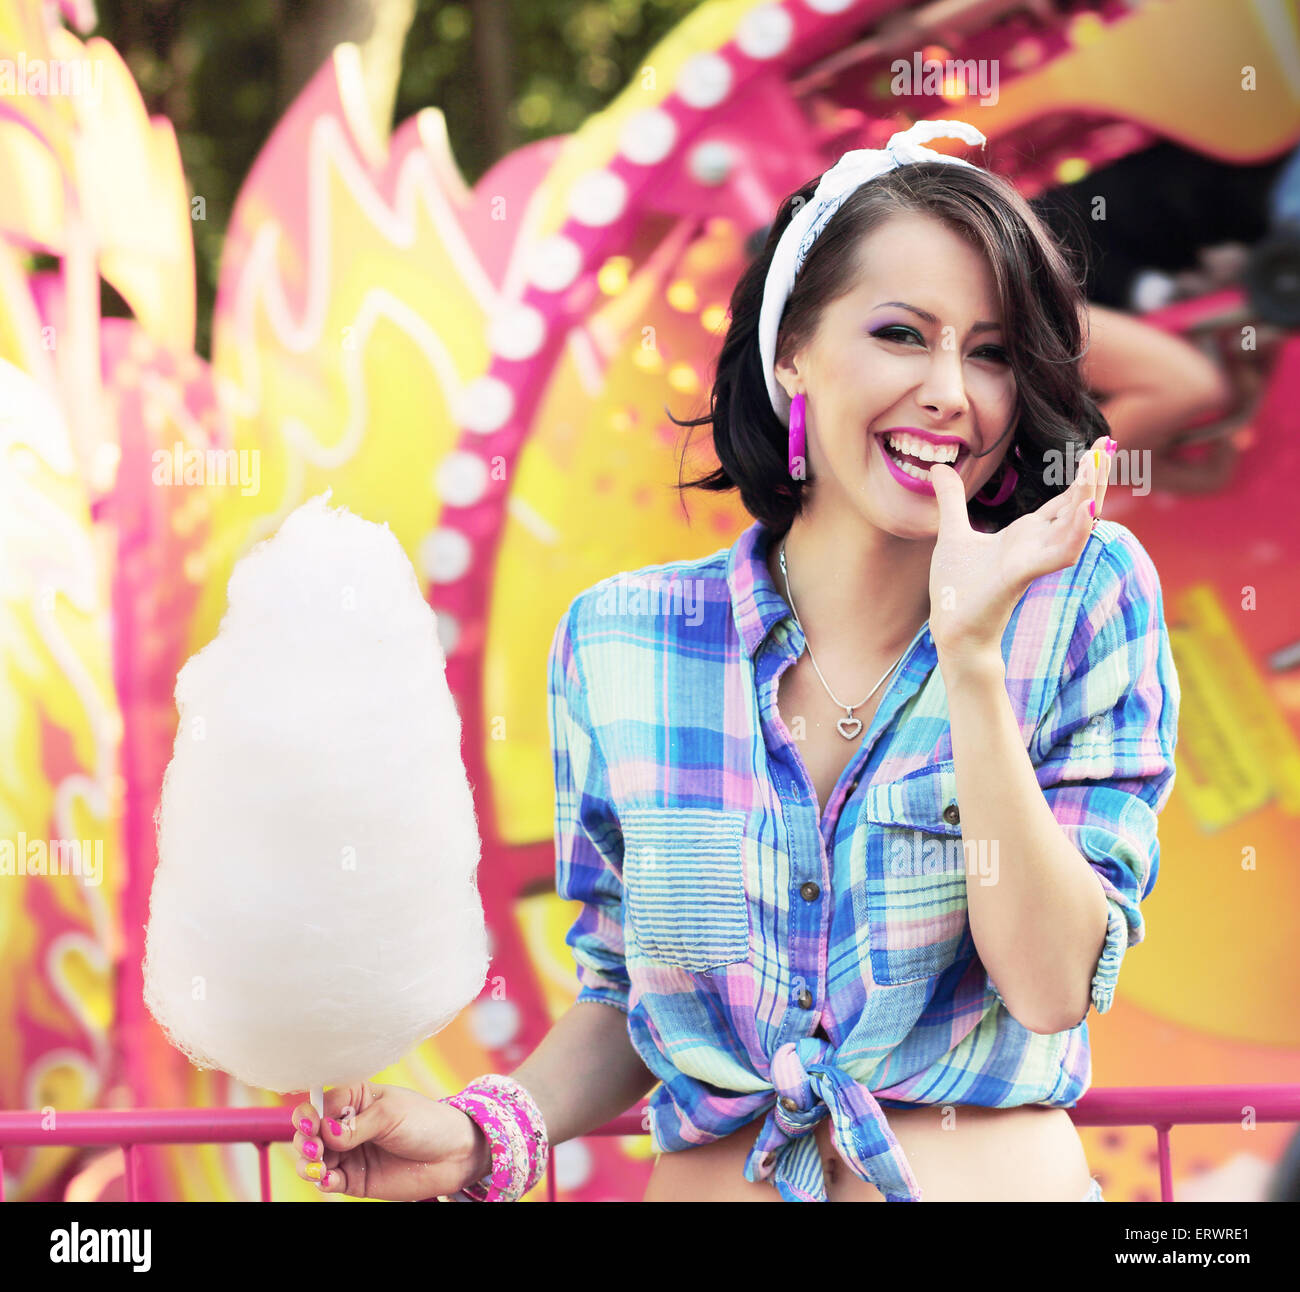 Toothy Smile. Young Woman with Cotton Candy in Amusement Park Stock Photo